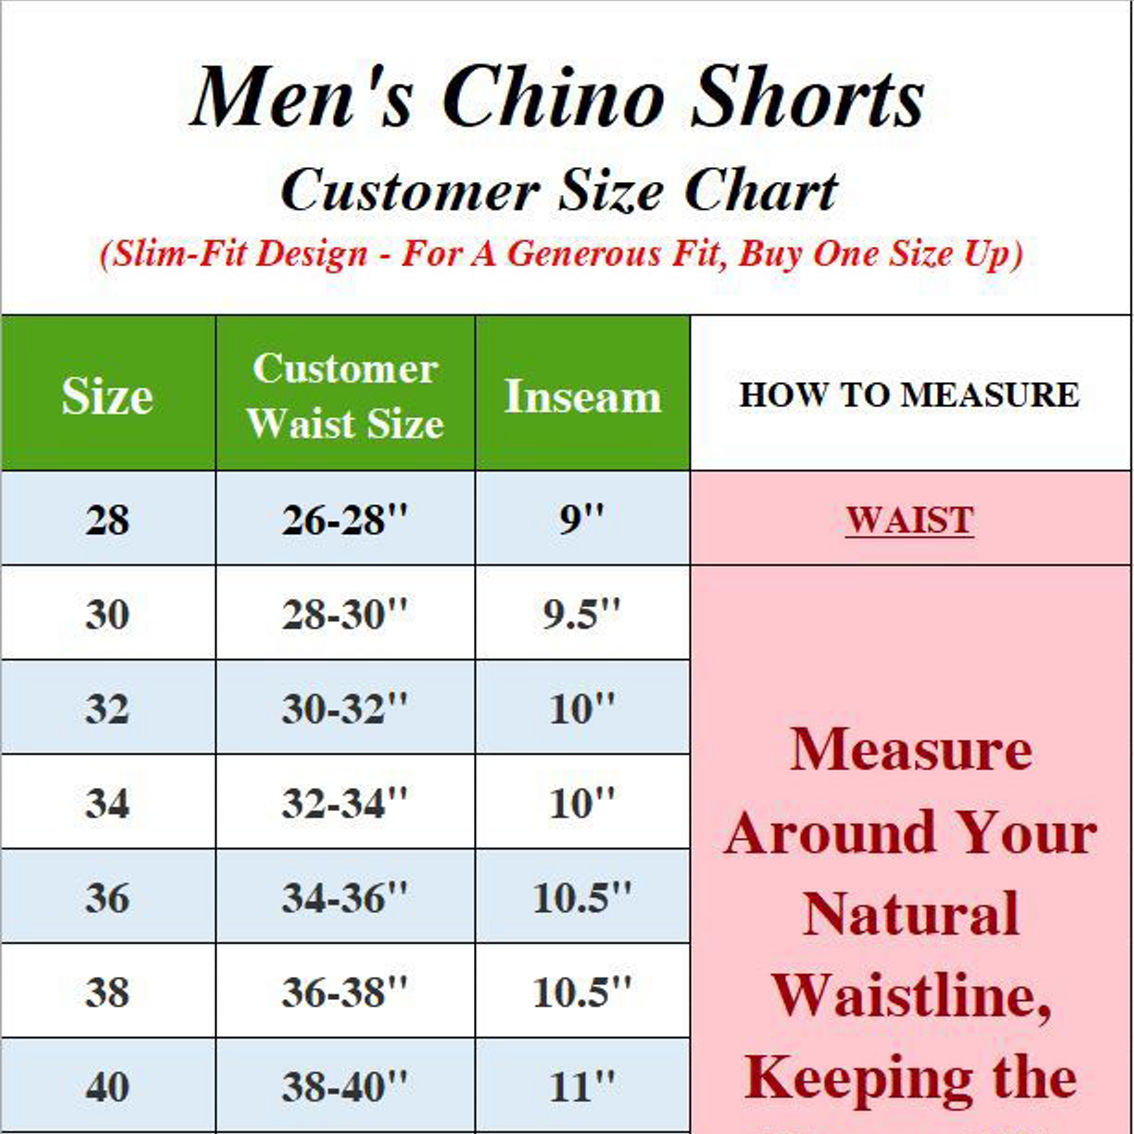 Men's 2-Pack Cotton Stretch Slim Fit Chino Shorts - Image 2 of 2